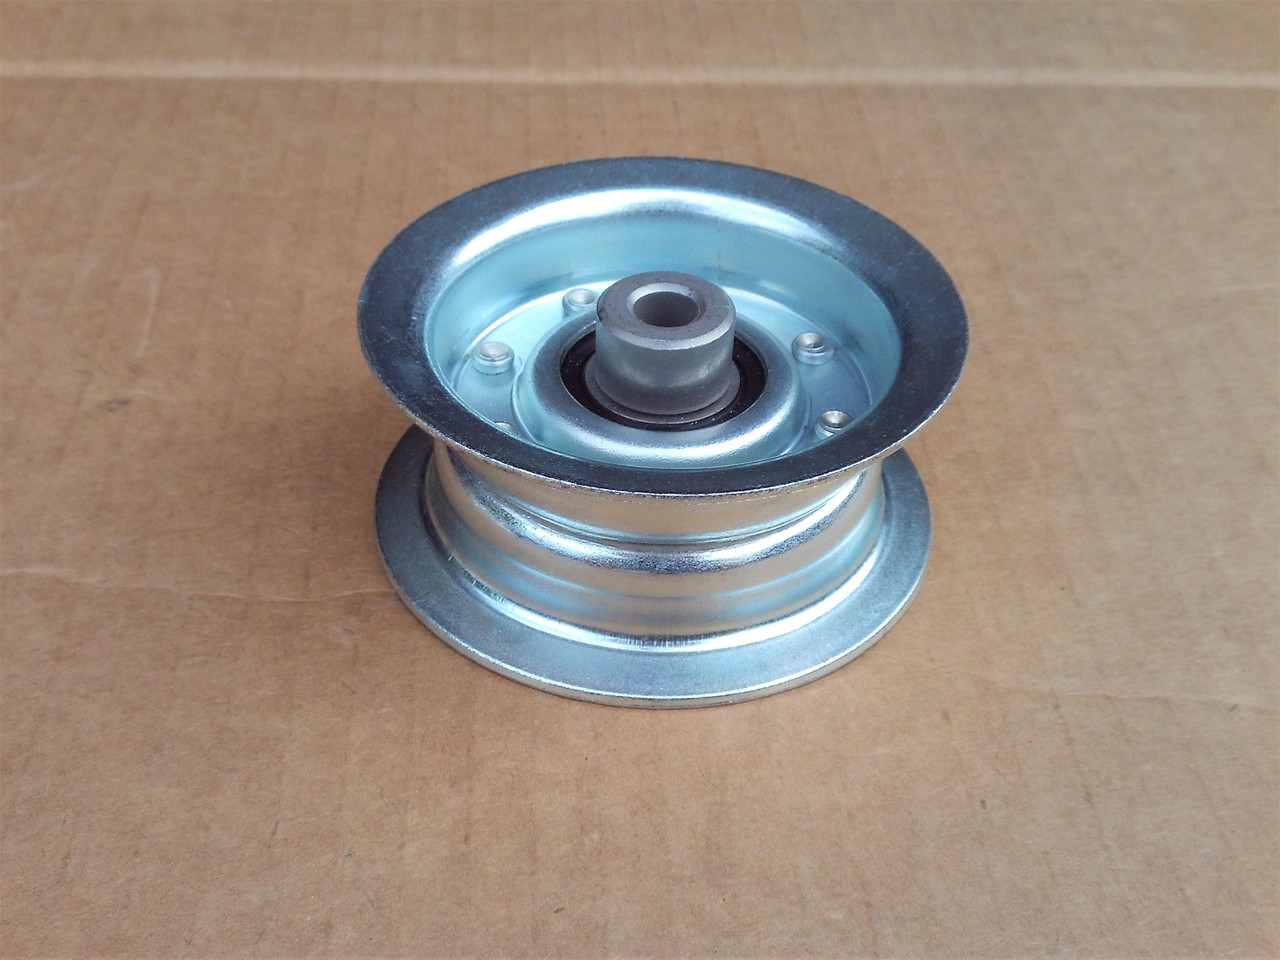 Idler Pulley for FMC 603810, 60-3810 ID: 3/8", OD: 3-1/2", Height: 1-9/16" Flat